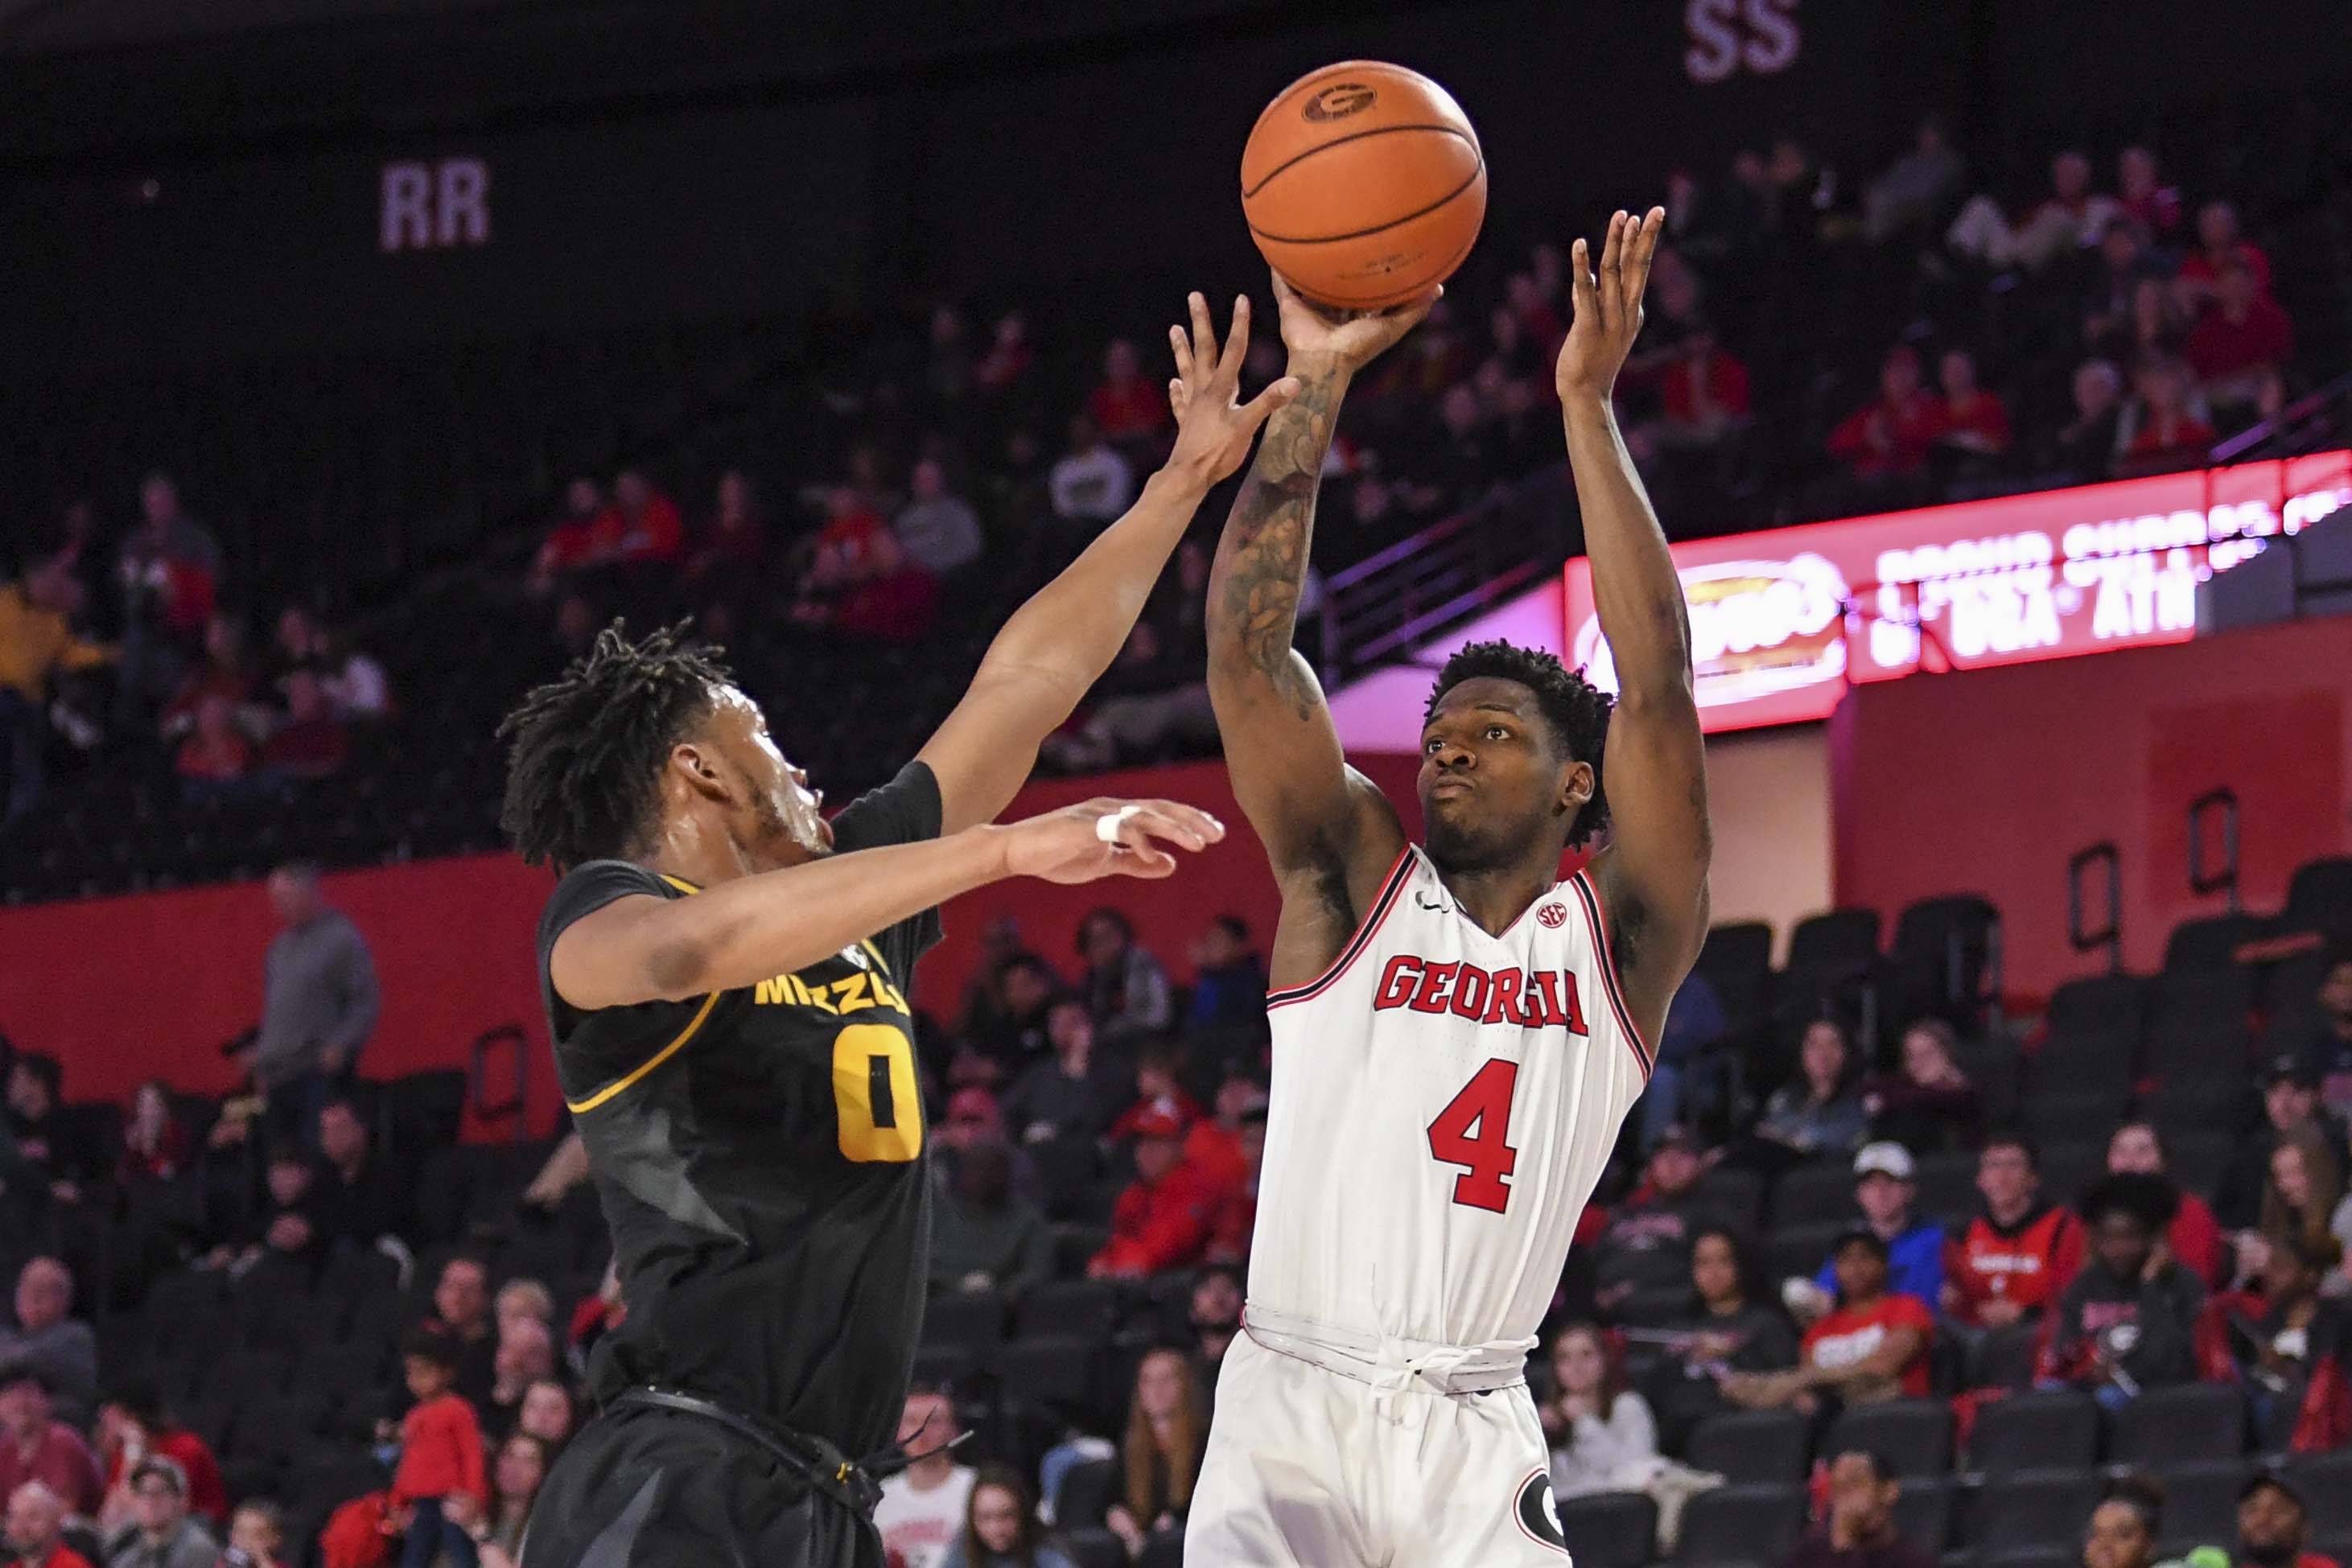 UGA basketball embarks on new journey Tuesday with starstudded roster